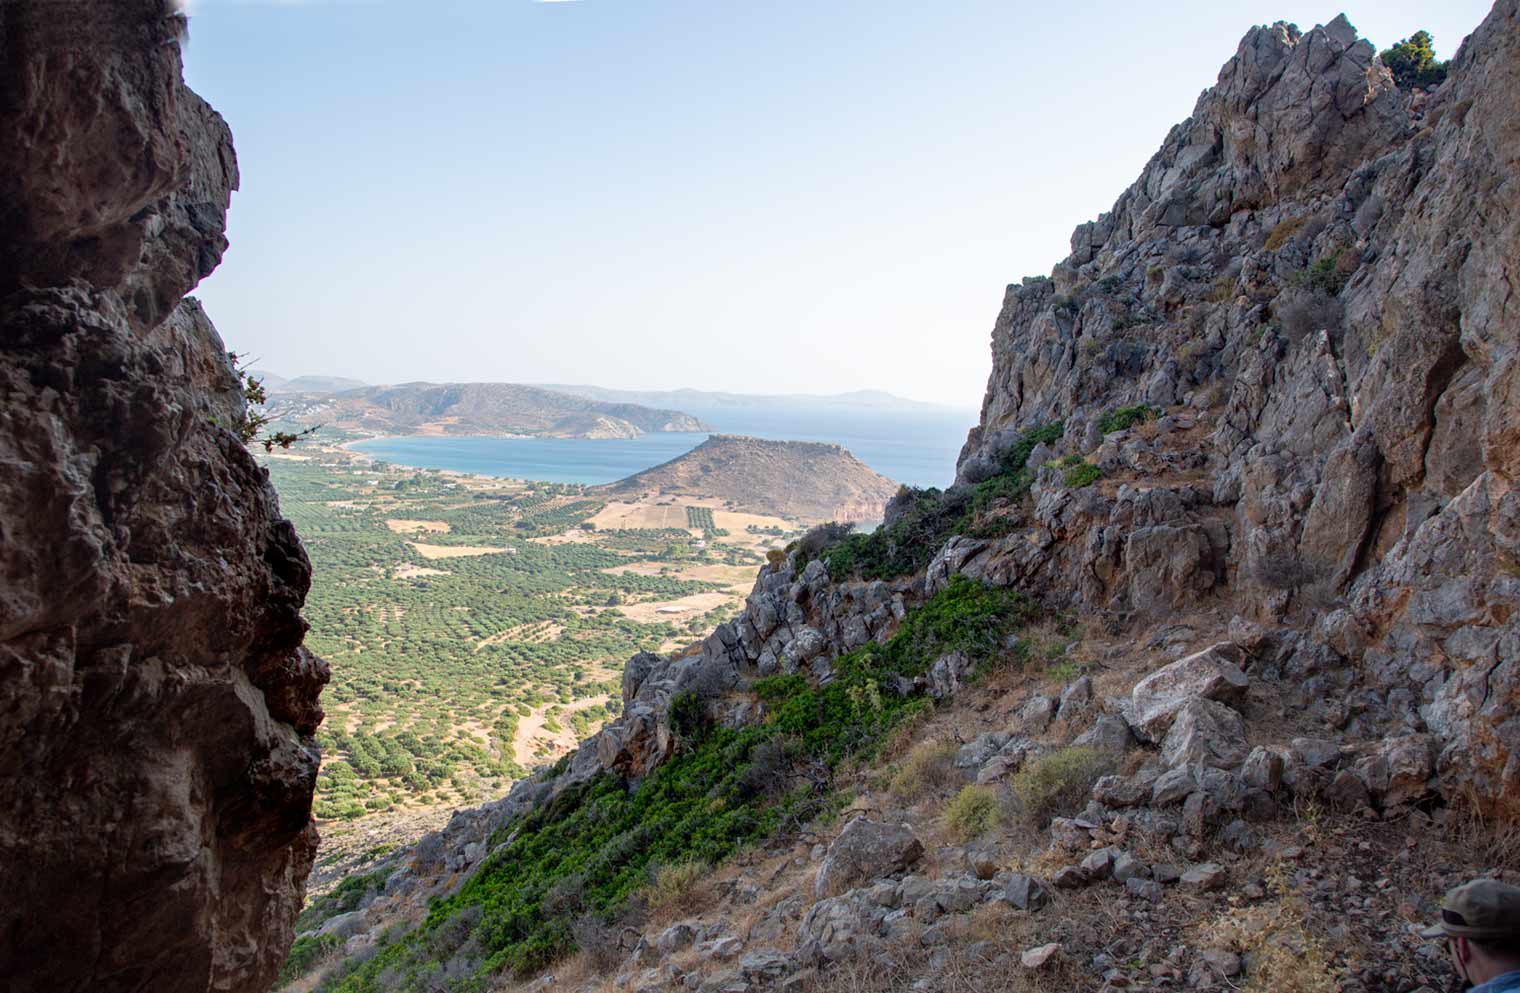 View from the cave on Mount Petsophas